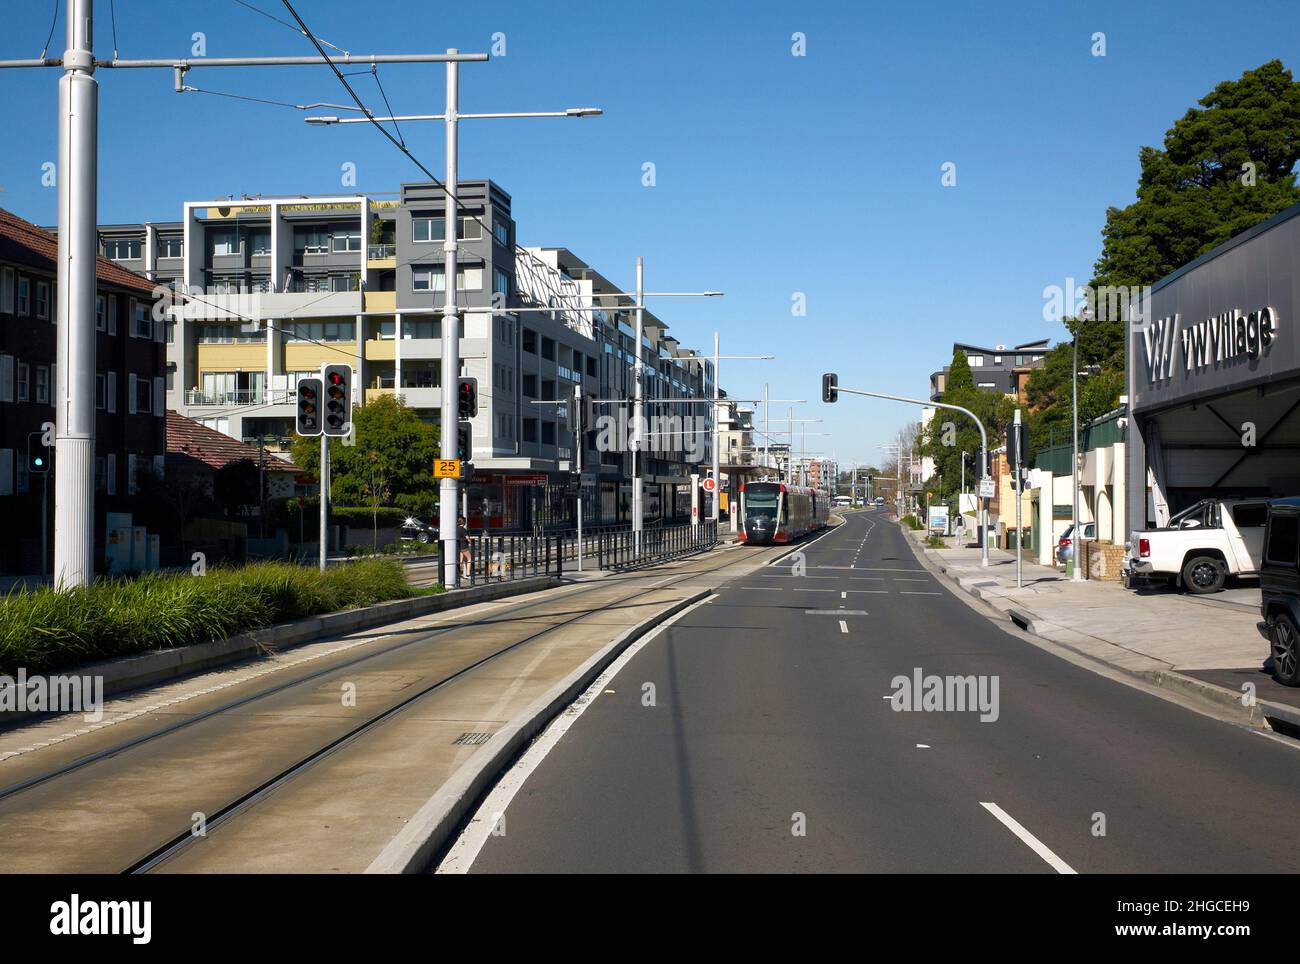 Colour photograph of apartments, commercial outlets and CBD and South East Light Rail, Anzac Parade, Kensington, Sydney, New South Wales, Australia Stock Photo